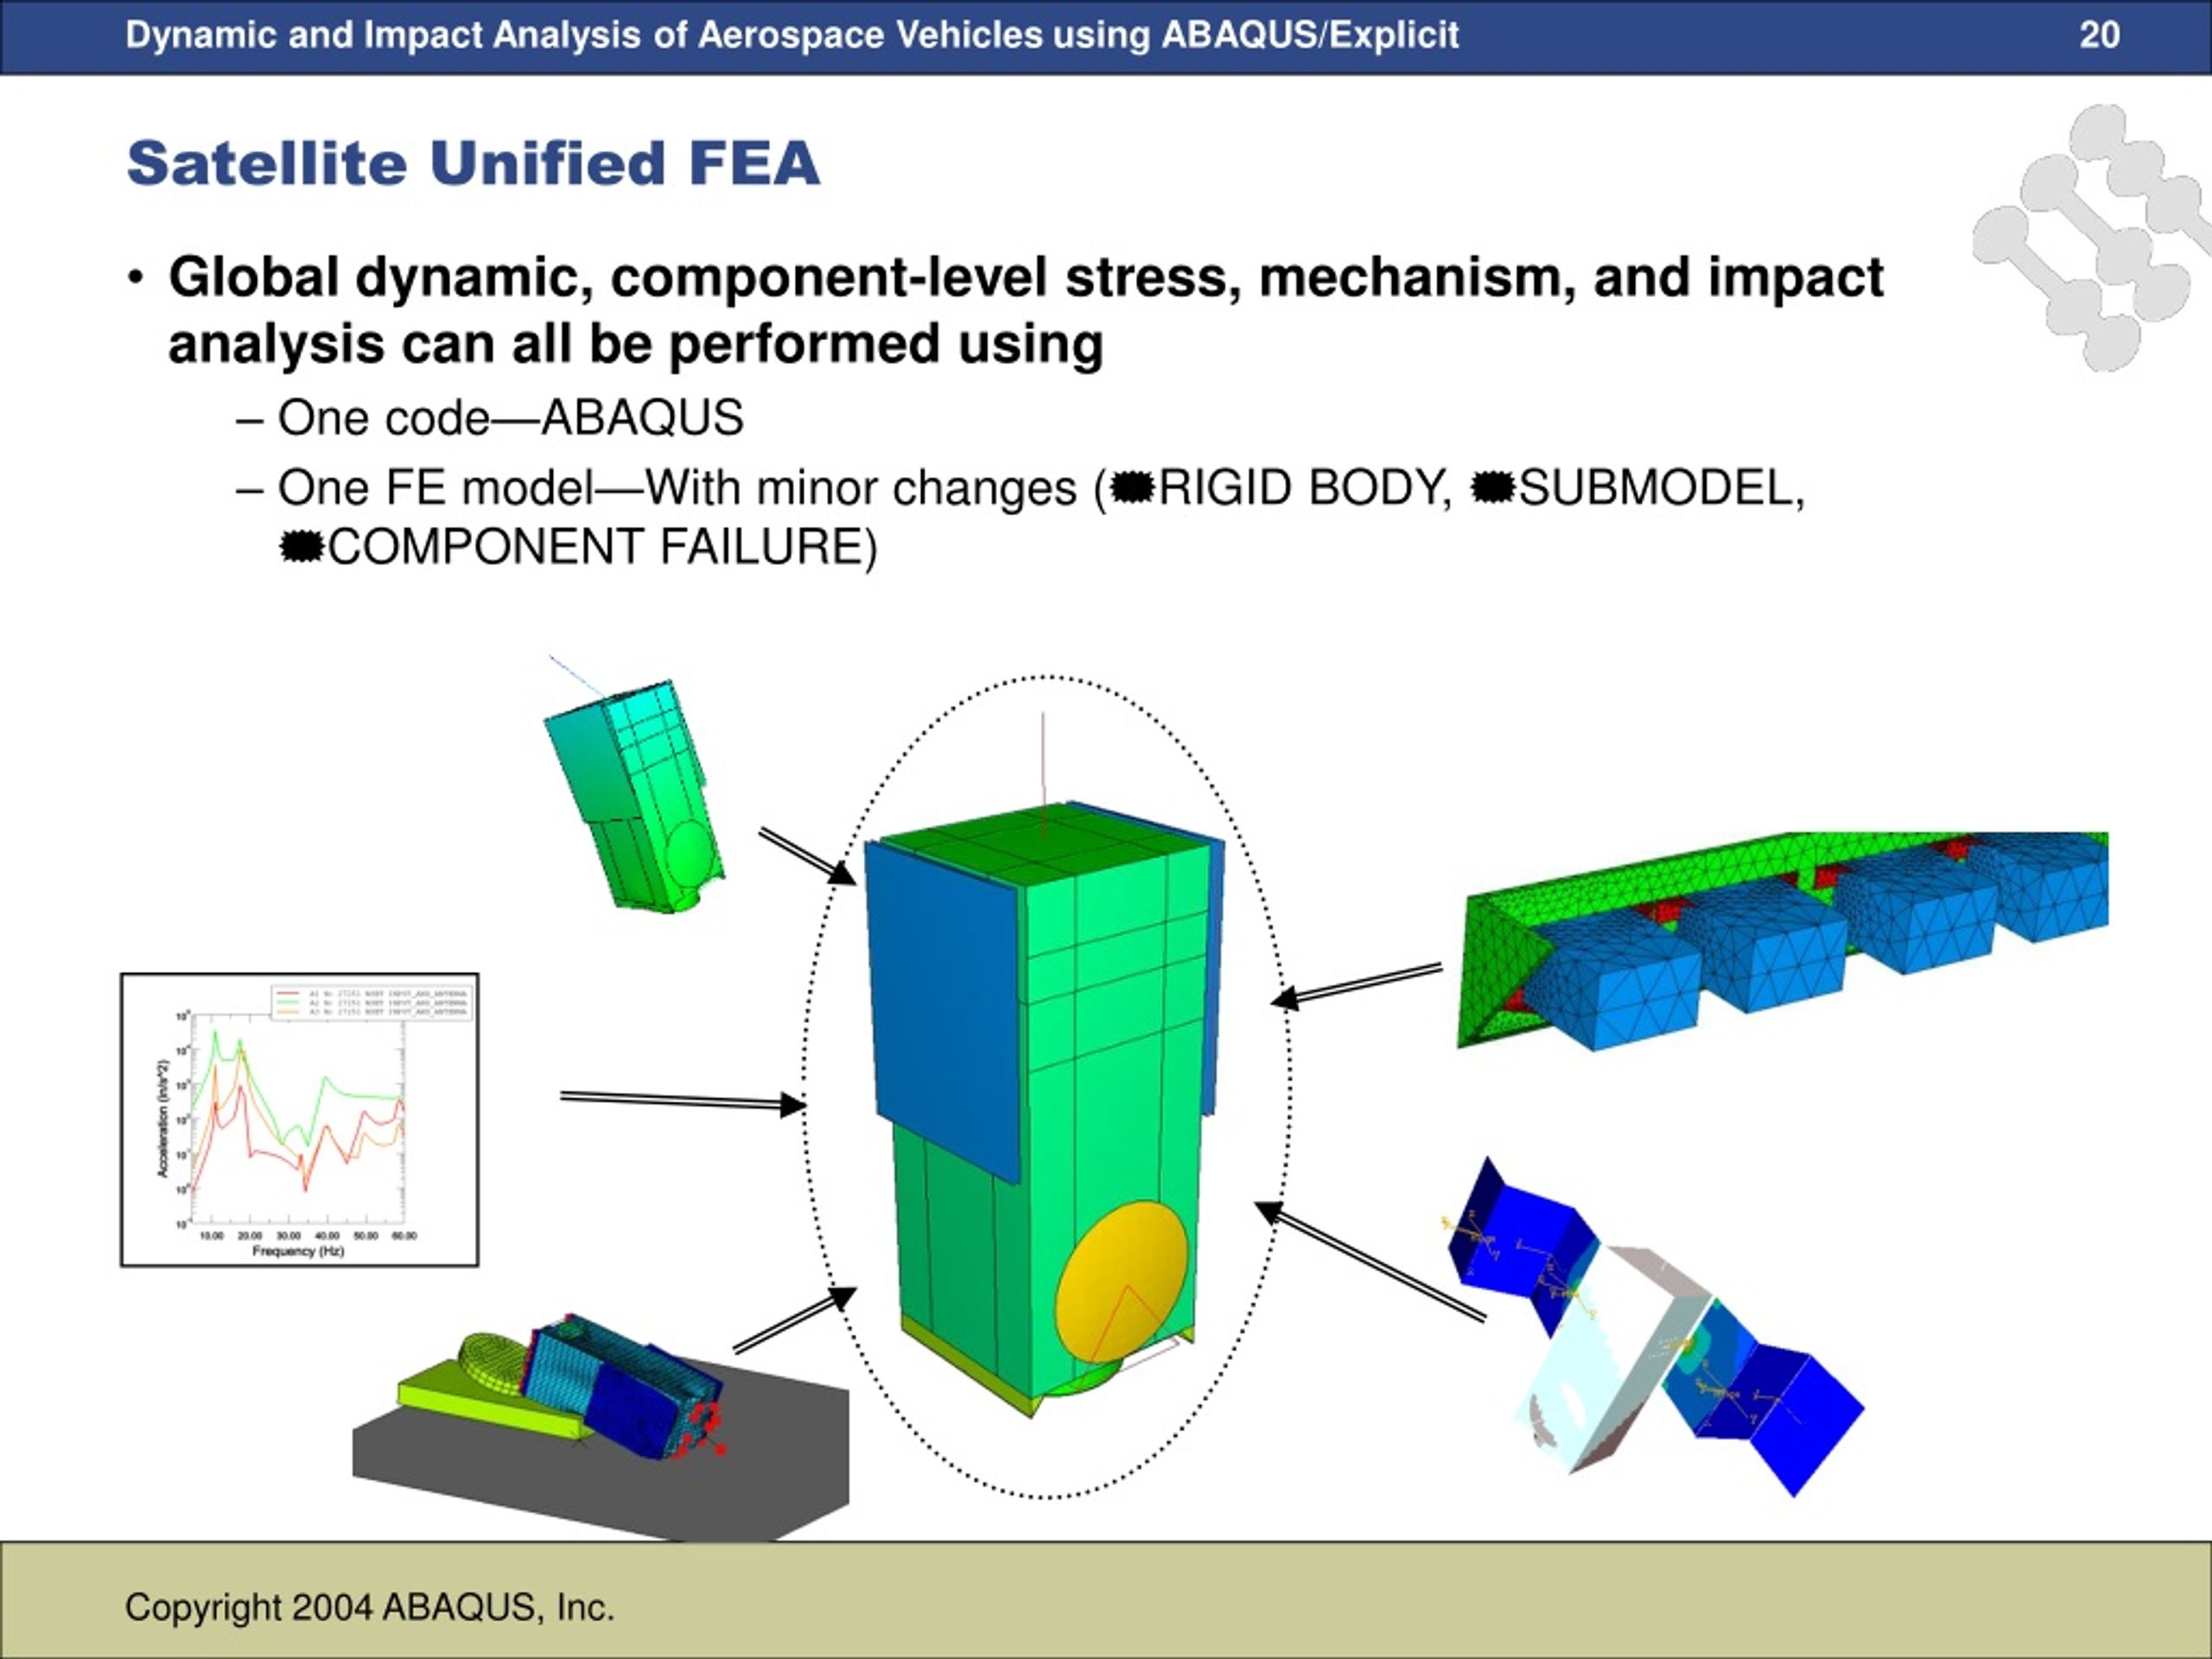 Dynamic component. Abaqus примеры расчета. Abaqus 2020. Acoustic emission Analysis Abaqus. For Modeling strain Gauges on a Composite Plate with Adhesive bonding Abaqus.